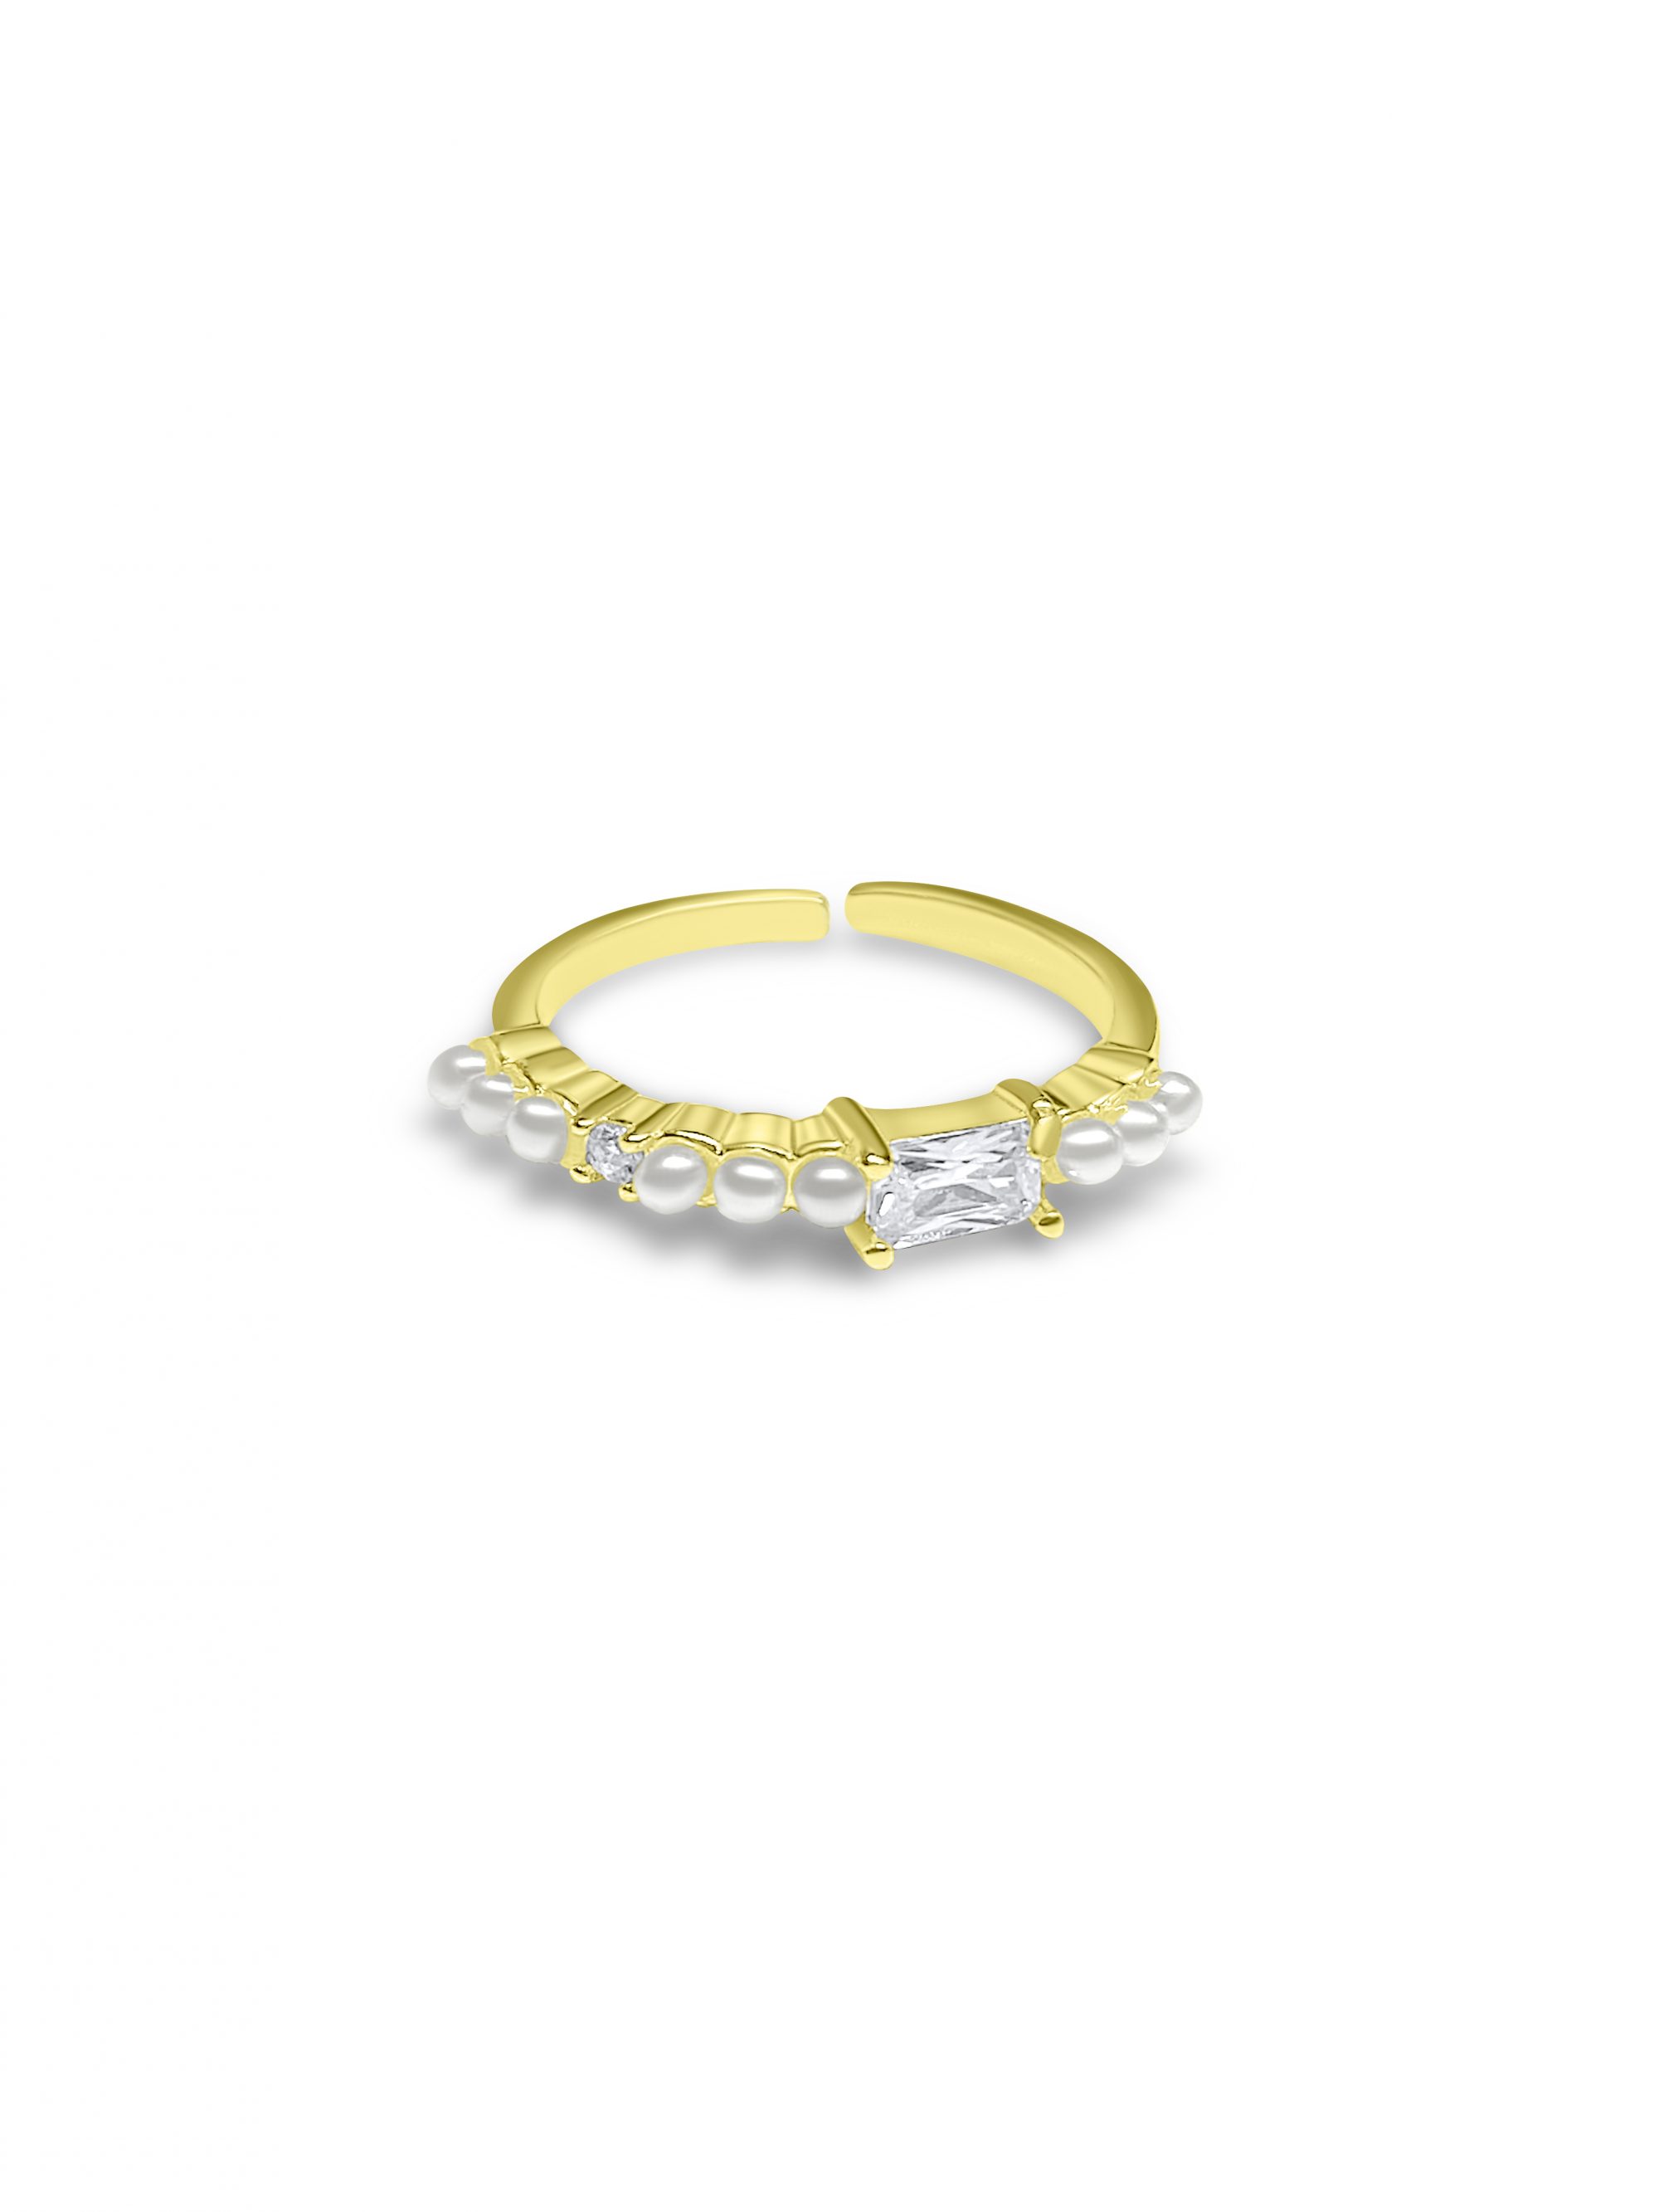 Gold plated ring with natural pearls and zircon stones